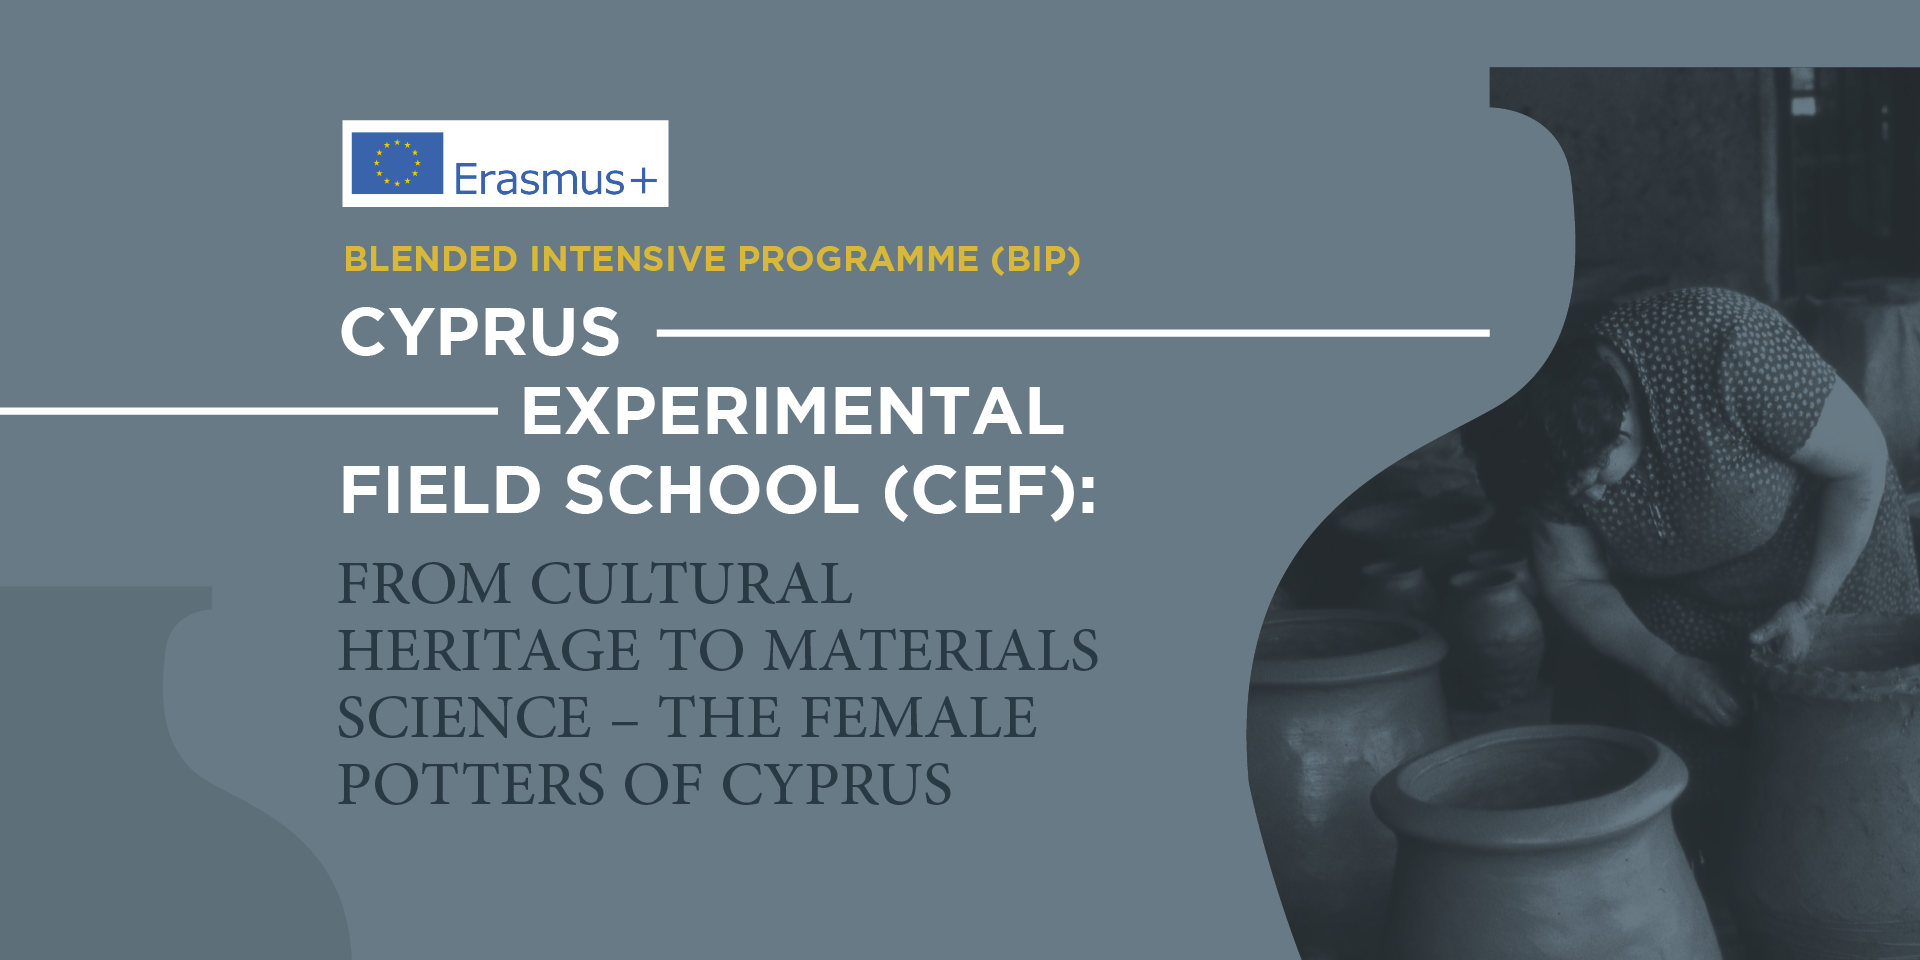 Erasmus+ Blended Intensive Programme (BIP): “Cyprus Experimental Field School (CEF): From Cultural Heritage to Materials Science – The Female Potters of Cyprus”